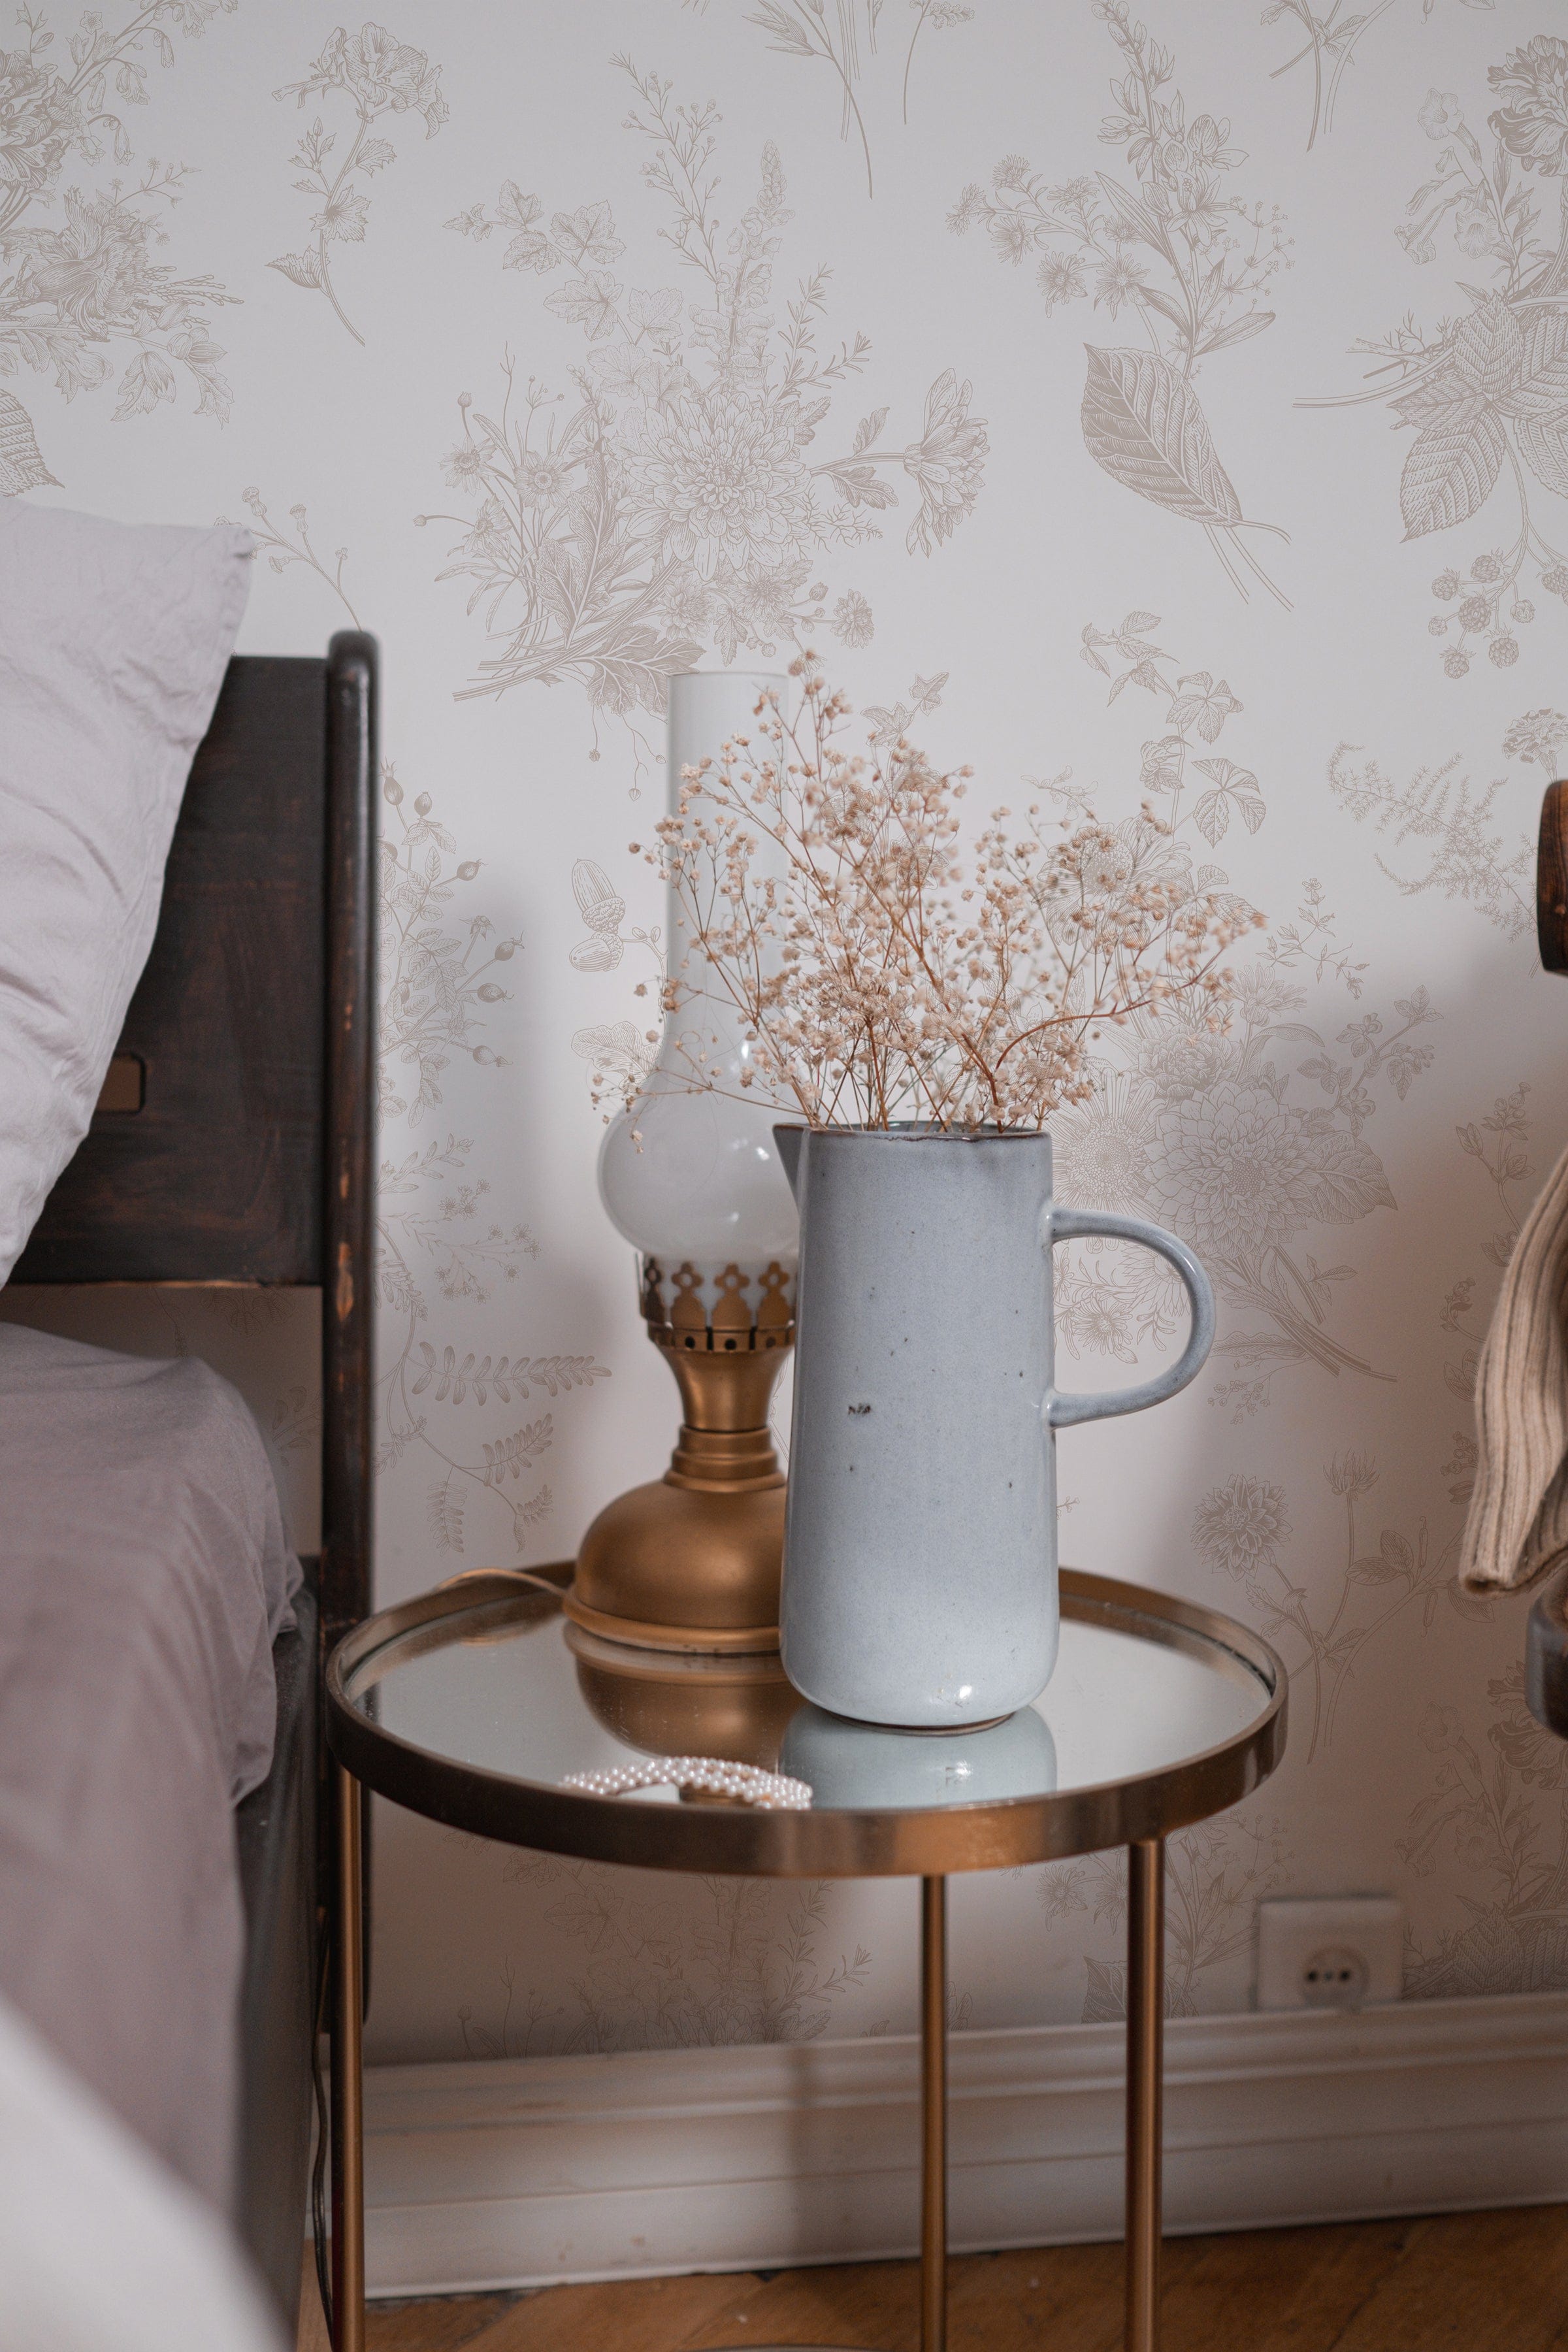 A cozy bedside scene with the Jouyful Garden Wallpaper in the background. A vintage wooden bedside table holds a pale blue ceramic pitcher filled with sprigs of dried flowers, accentuating the wallpaper's romantic and pastoral print. The gentle pattern of the wallpaper, with its muted tones and fine details, complements the simplicity and rustic charm of the bedroom decor.